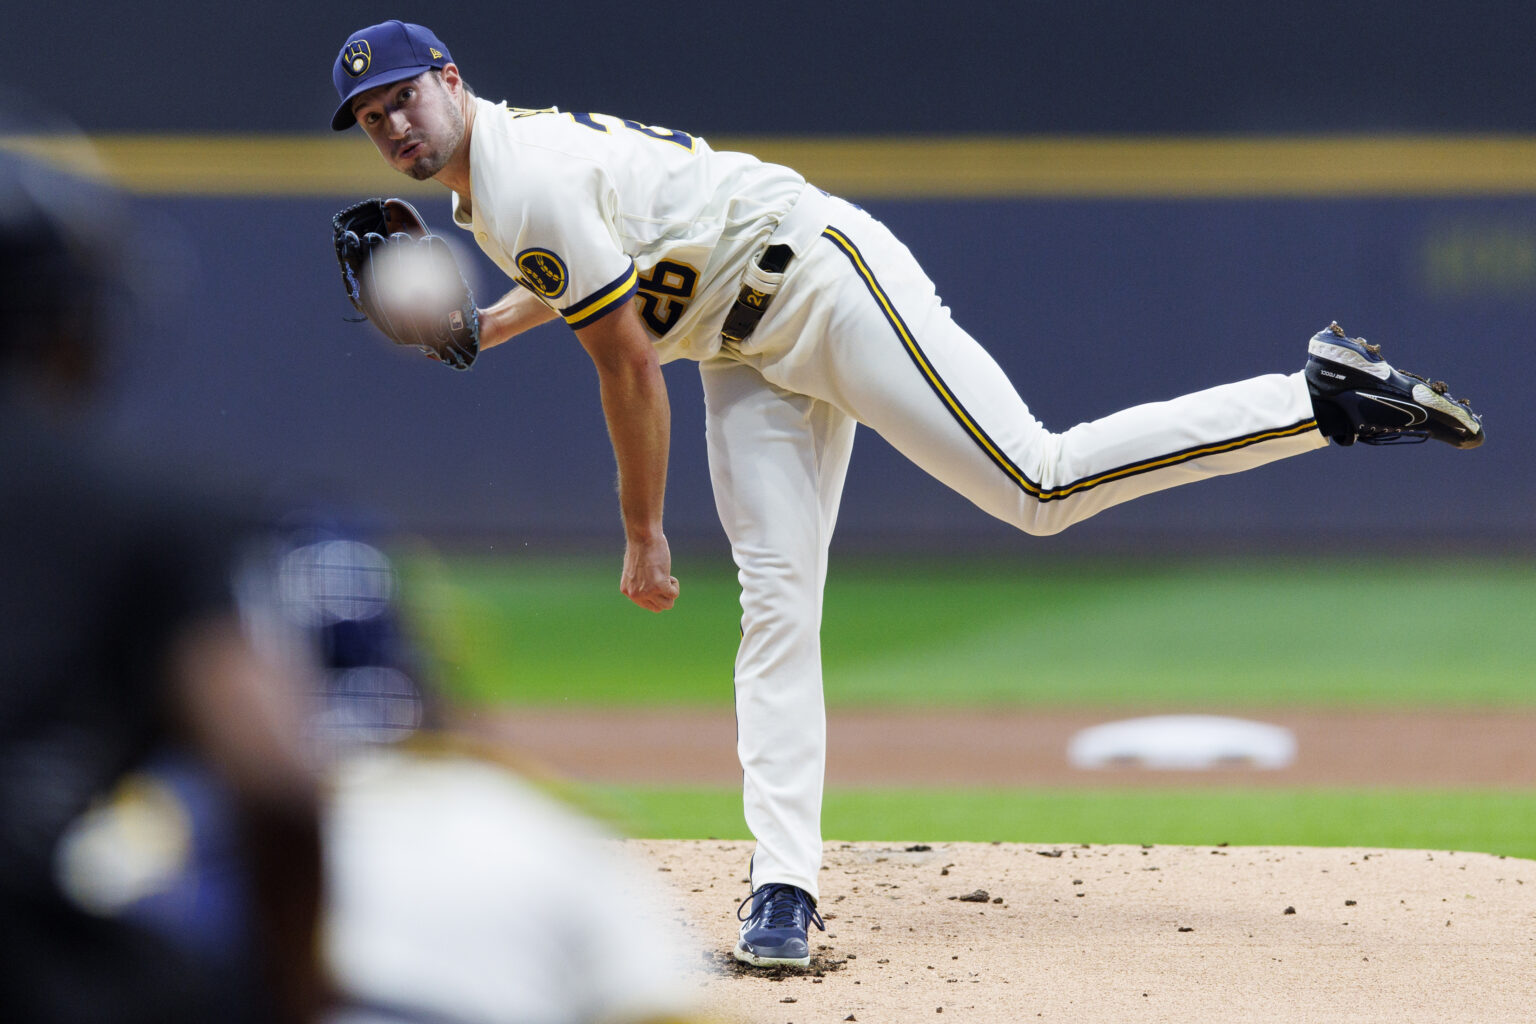 Milwaukee Brewers, Brewers News, Brewers Spring Training, Aaron Ashby